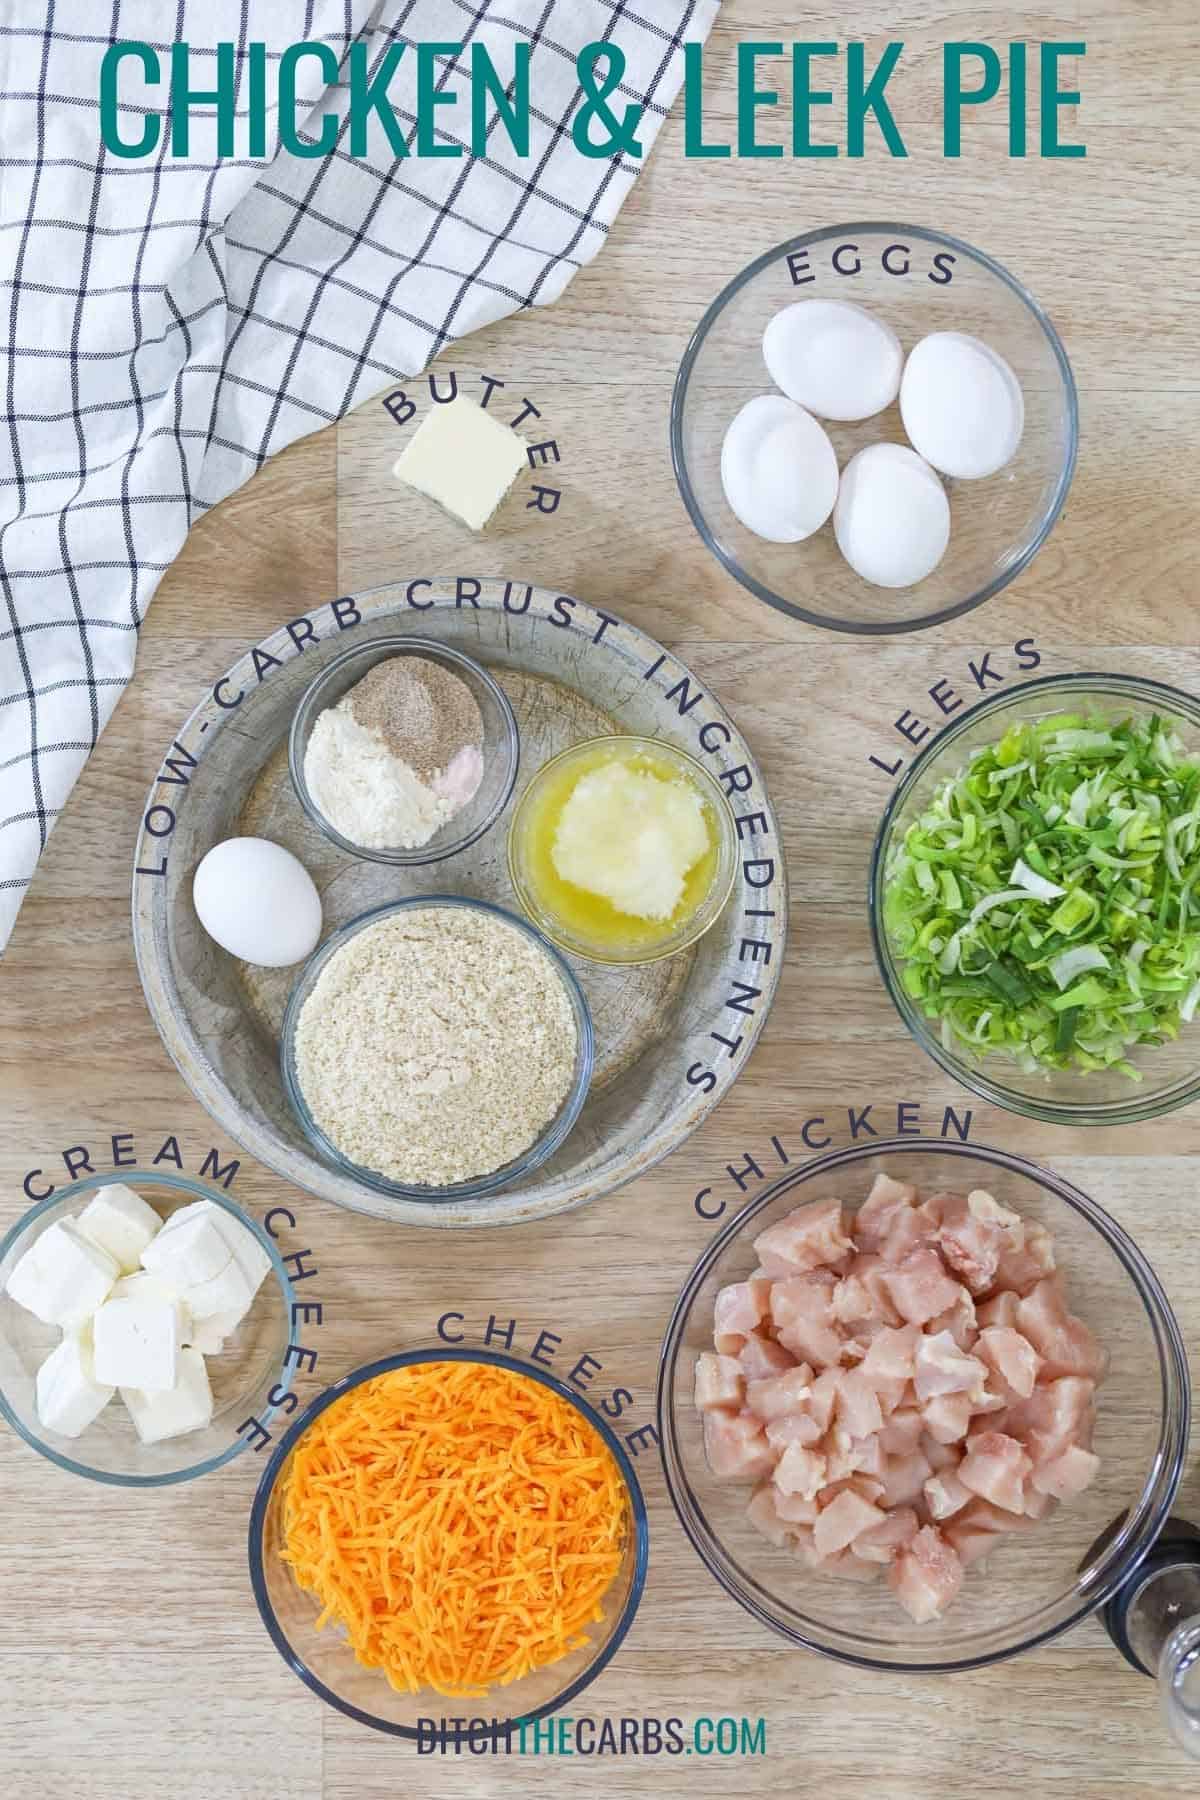 ingredients needed to make a chicken and leek pie